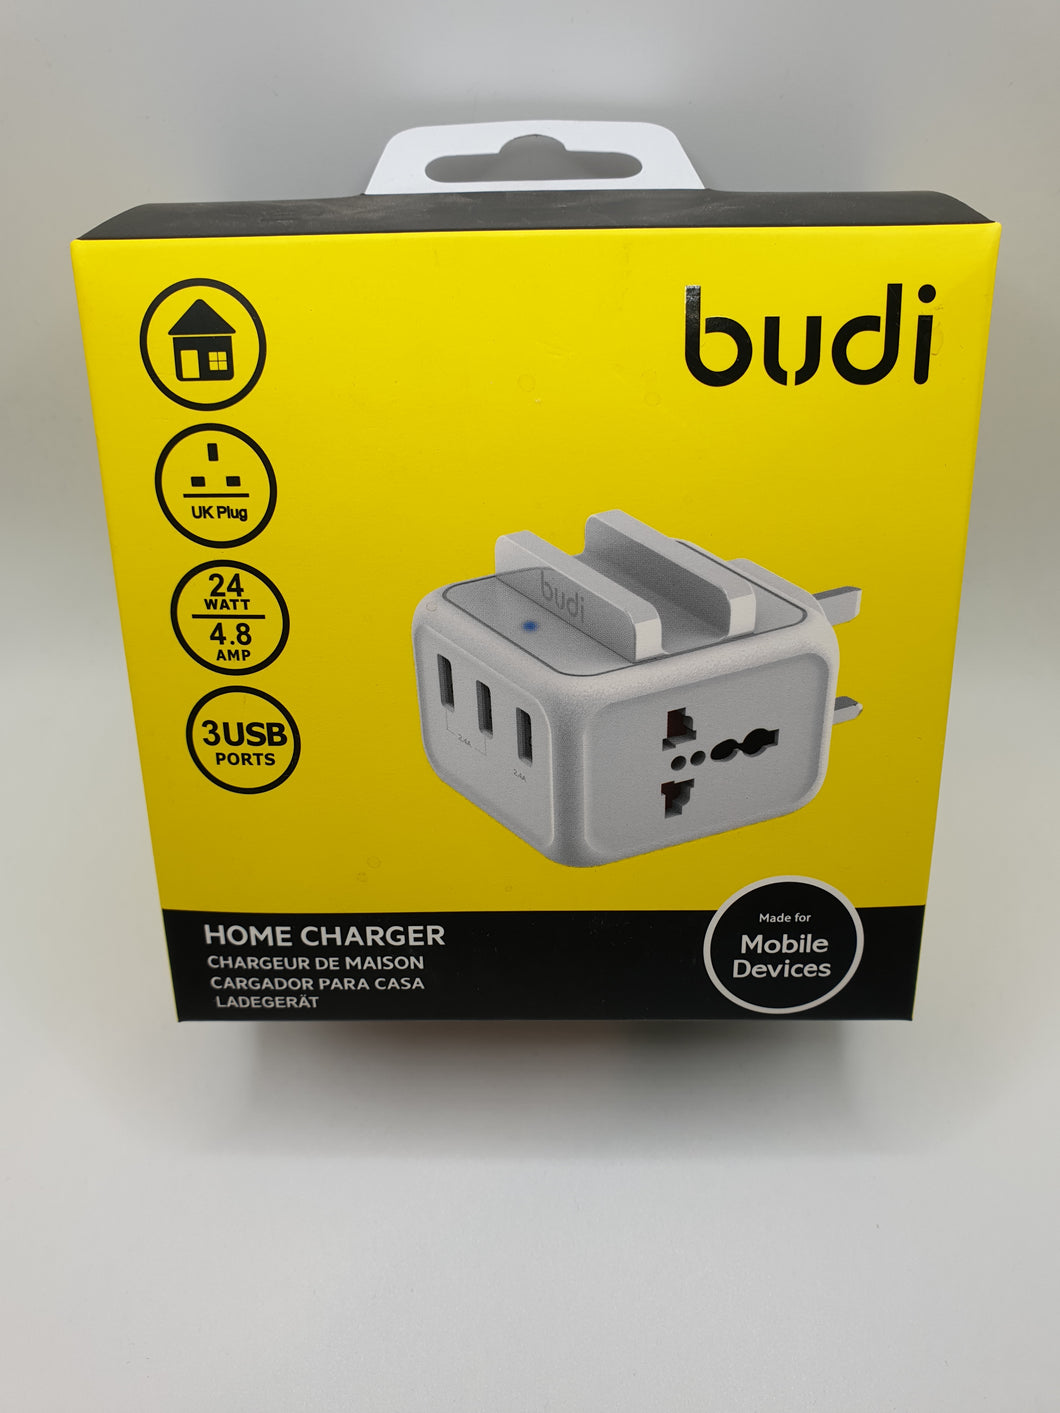 Budi Home Charger UK Plug 24Watt 4.8AMP 3x USB Ports Fast Charging For Smartphones Tablets With Holder Shavers International Adapters